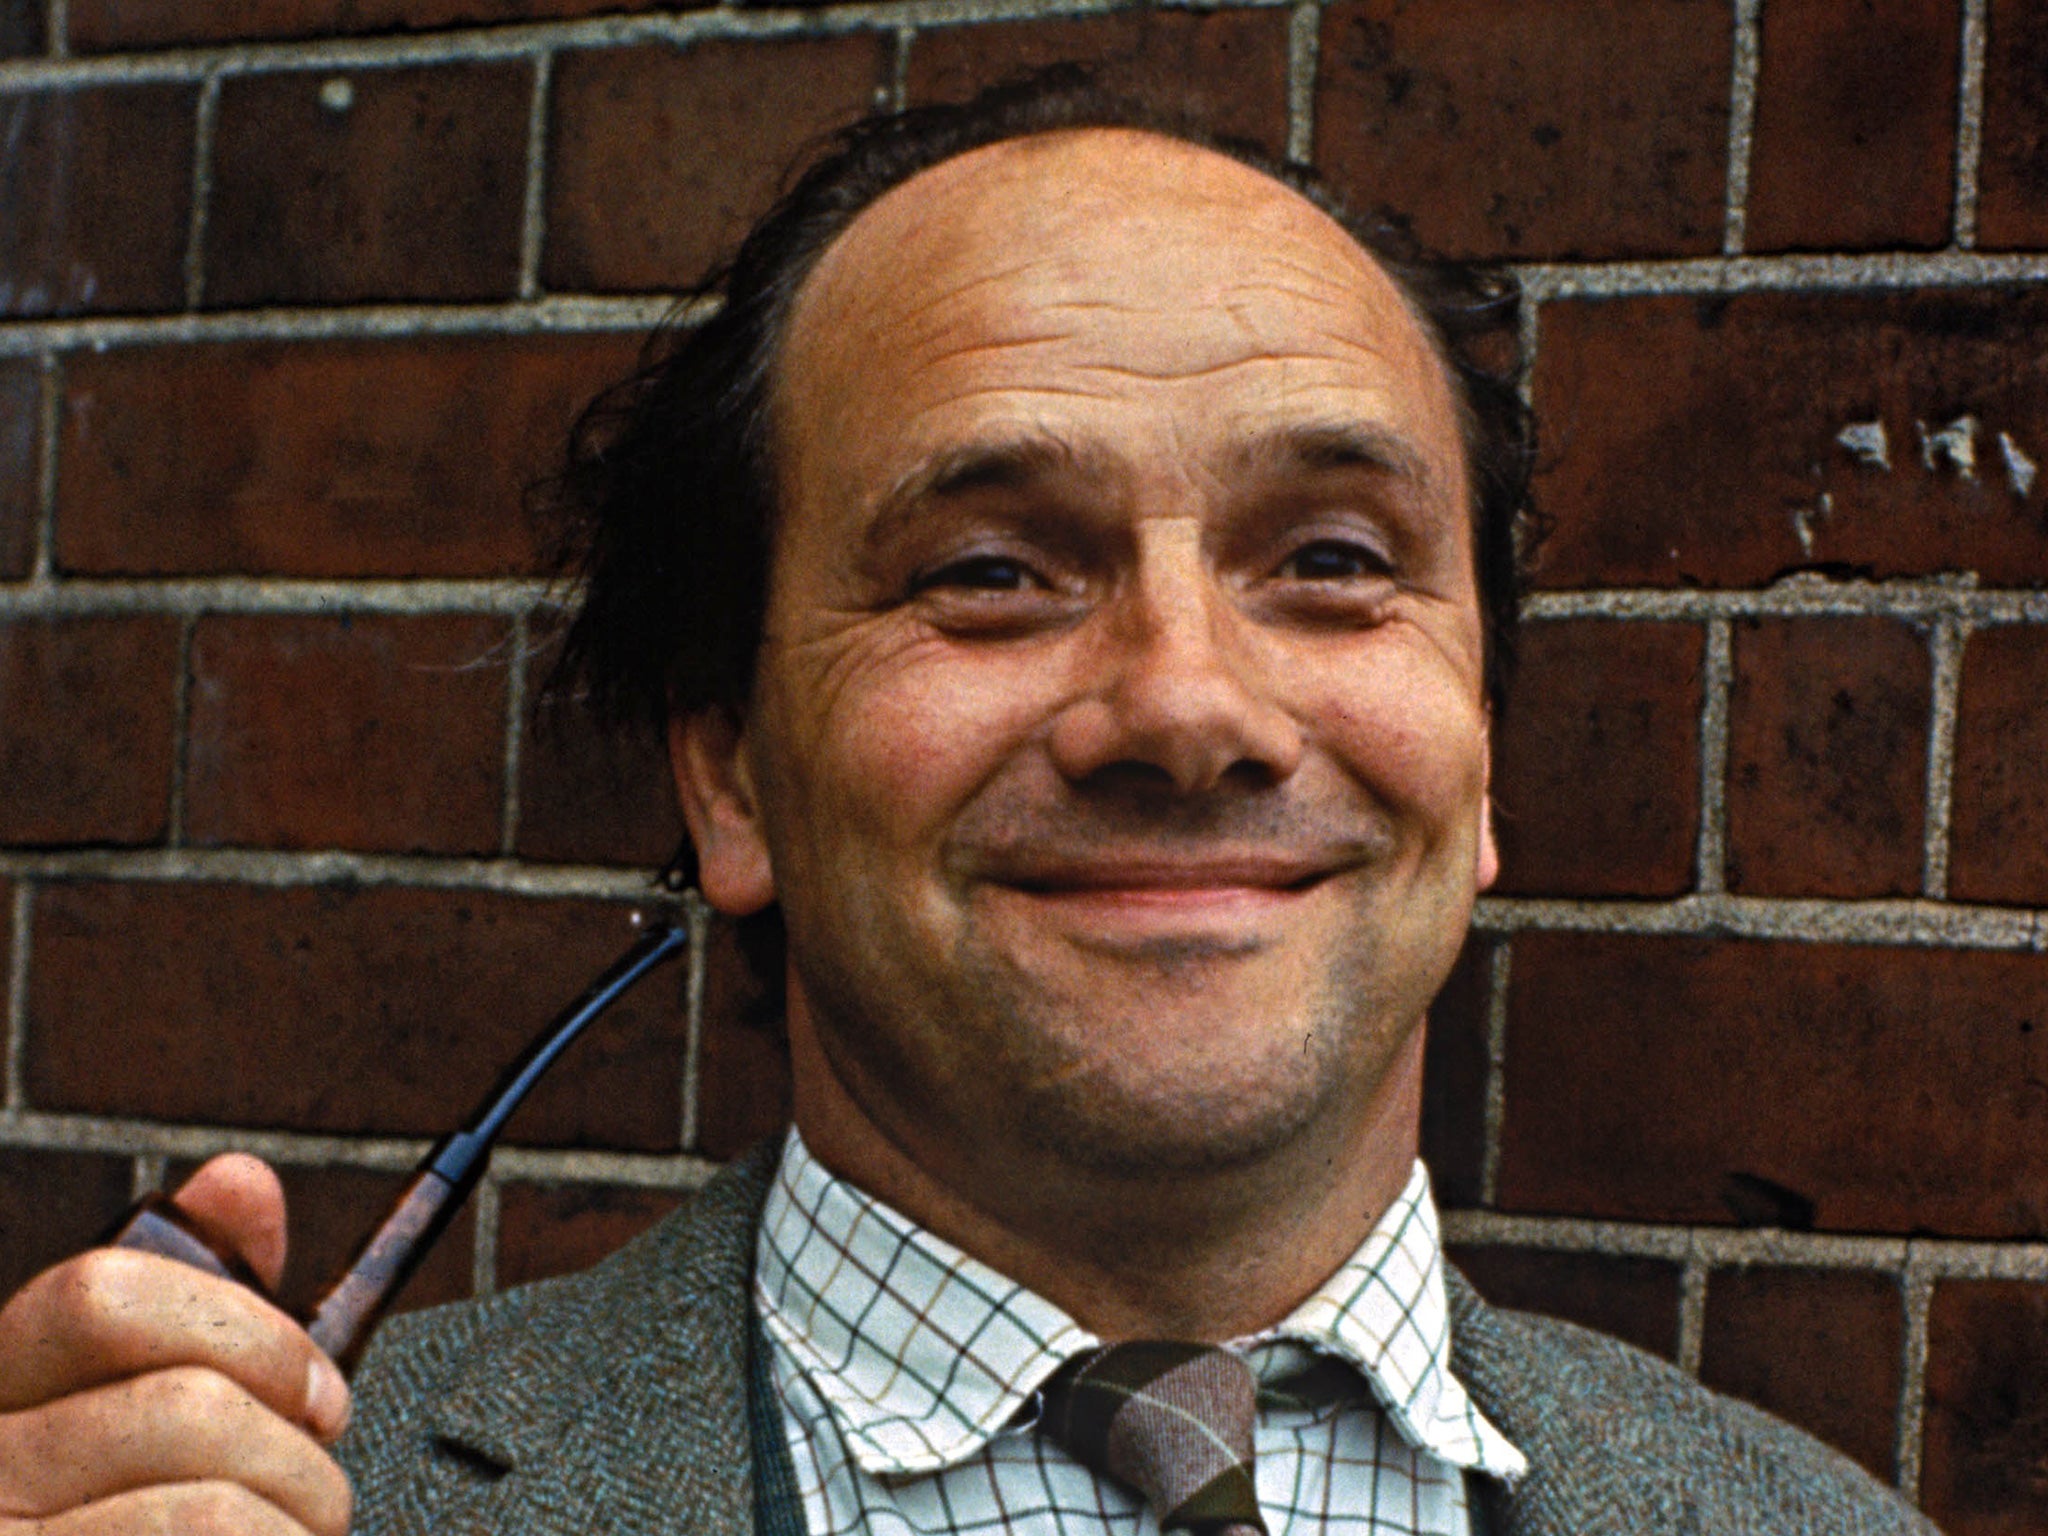 Davies as Mr Price in ‘Please Sir!’: the smile was untypical of the character